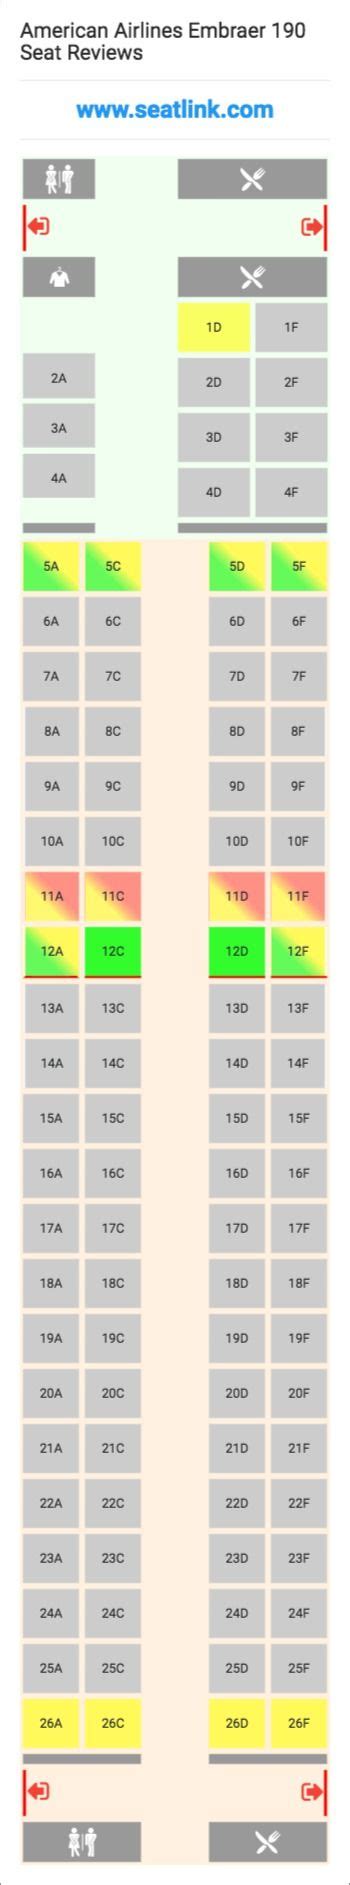 American Airlines Embraer 190 E90 Seat Map American Airlines